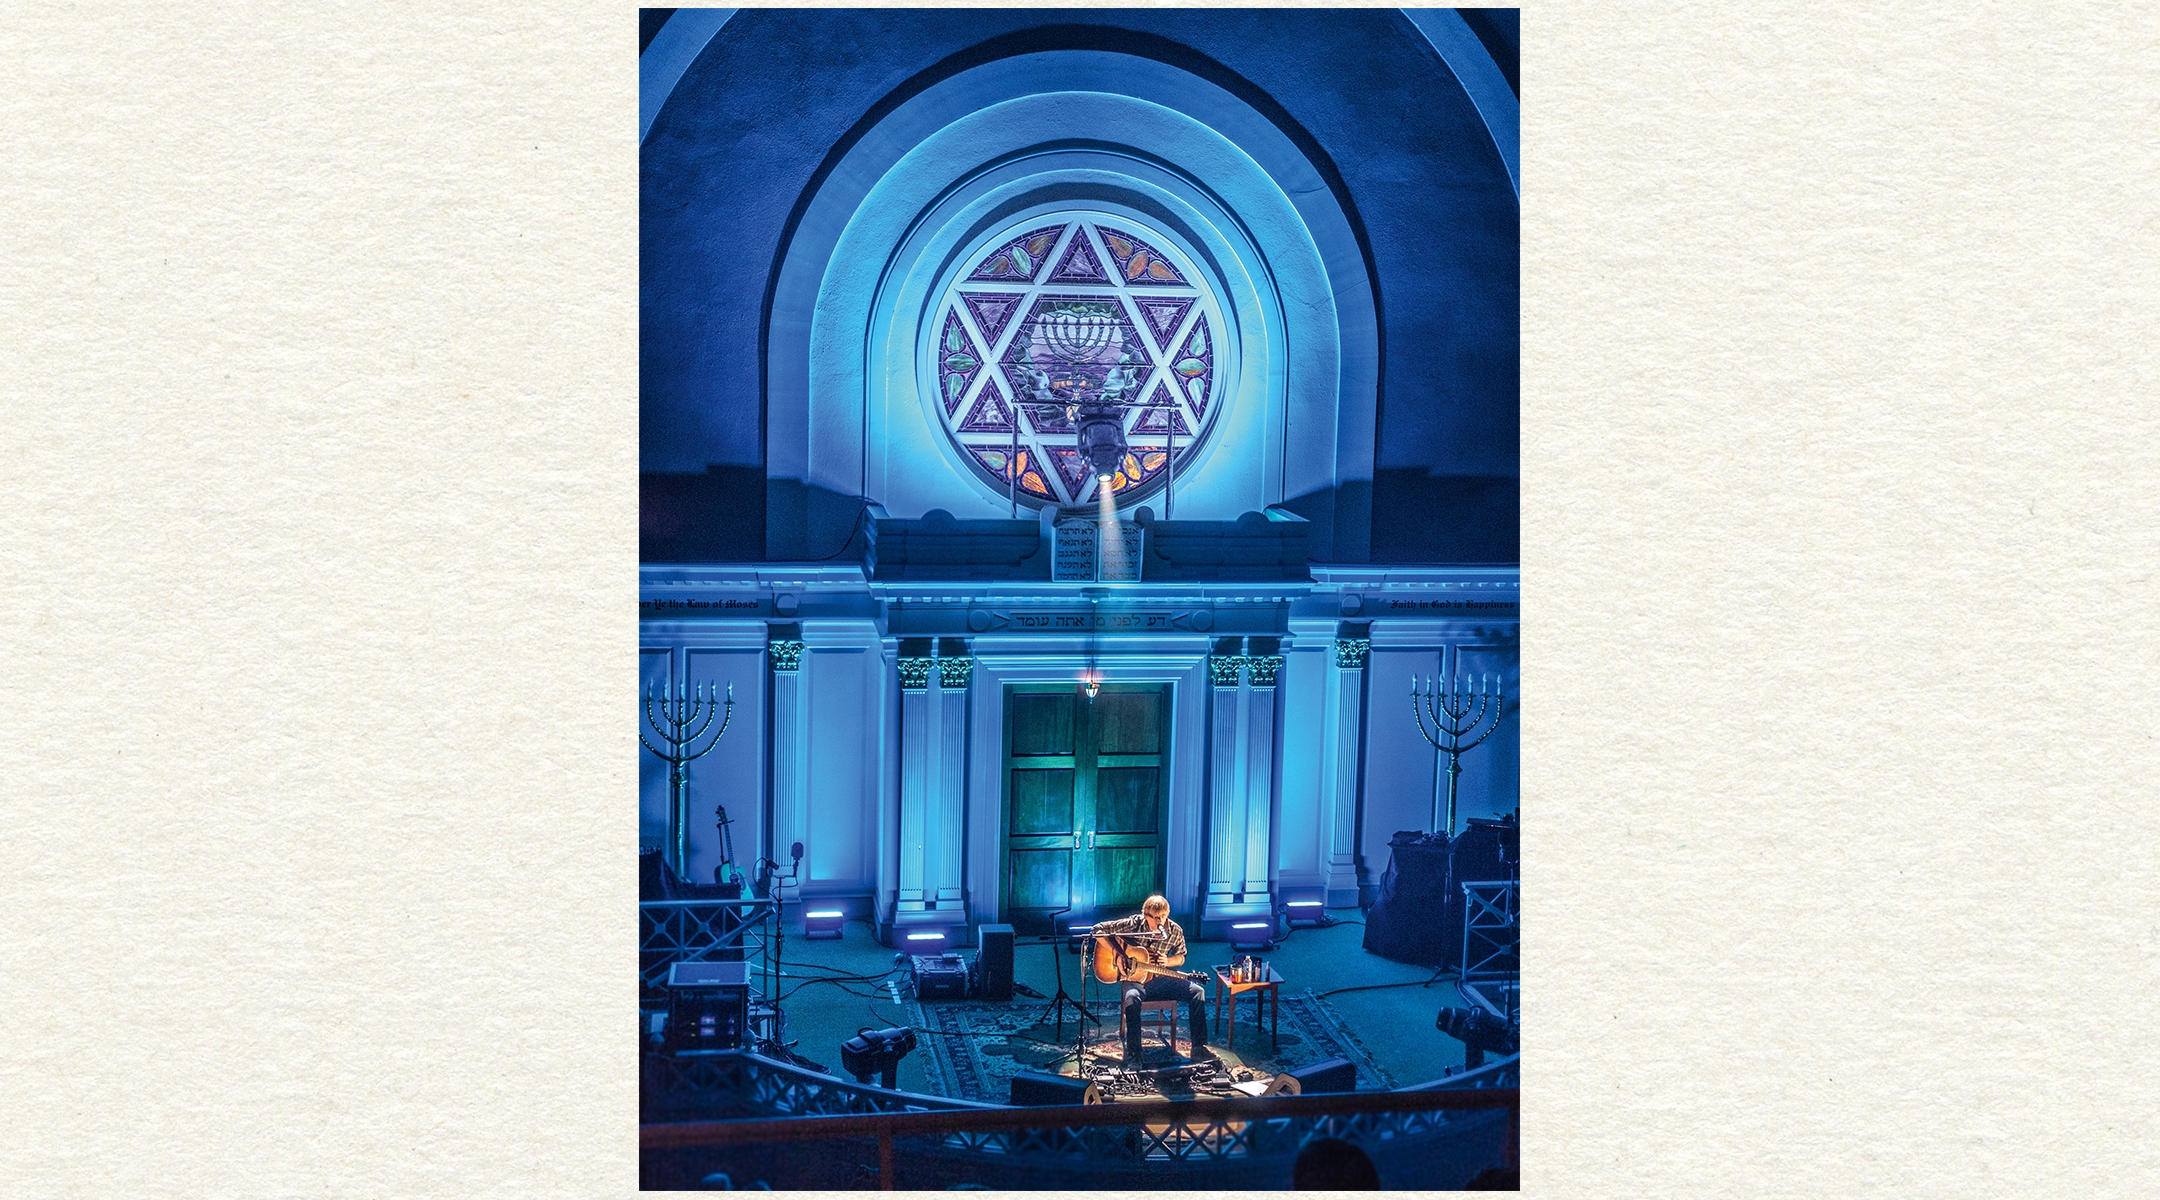 Phish frontman Trey Anastasio performs at the Sixth and I synagogue in Washington, D.C., in 2018. (Andrea Nusinov)